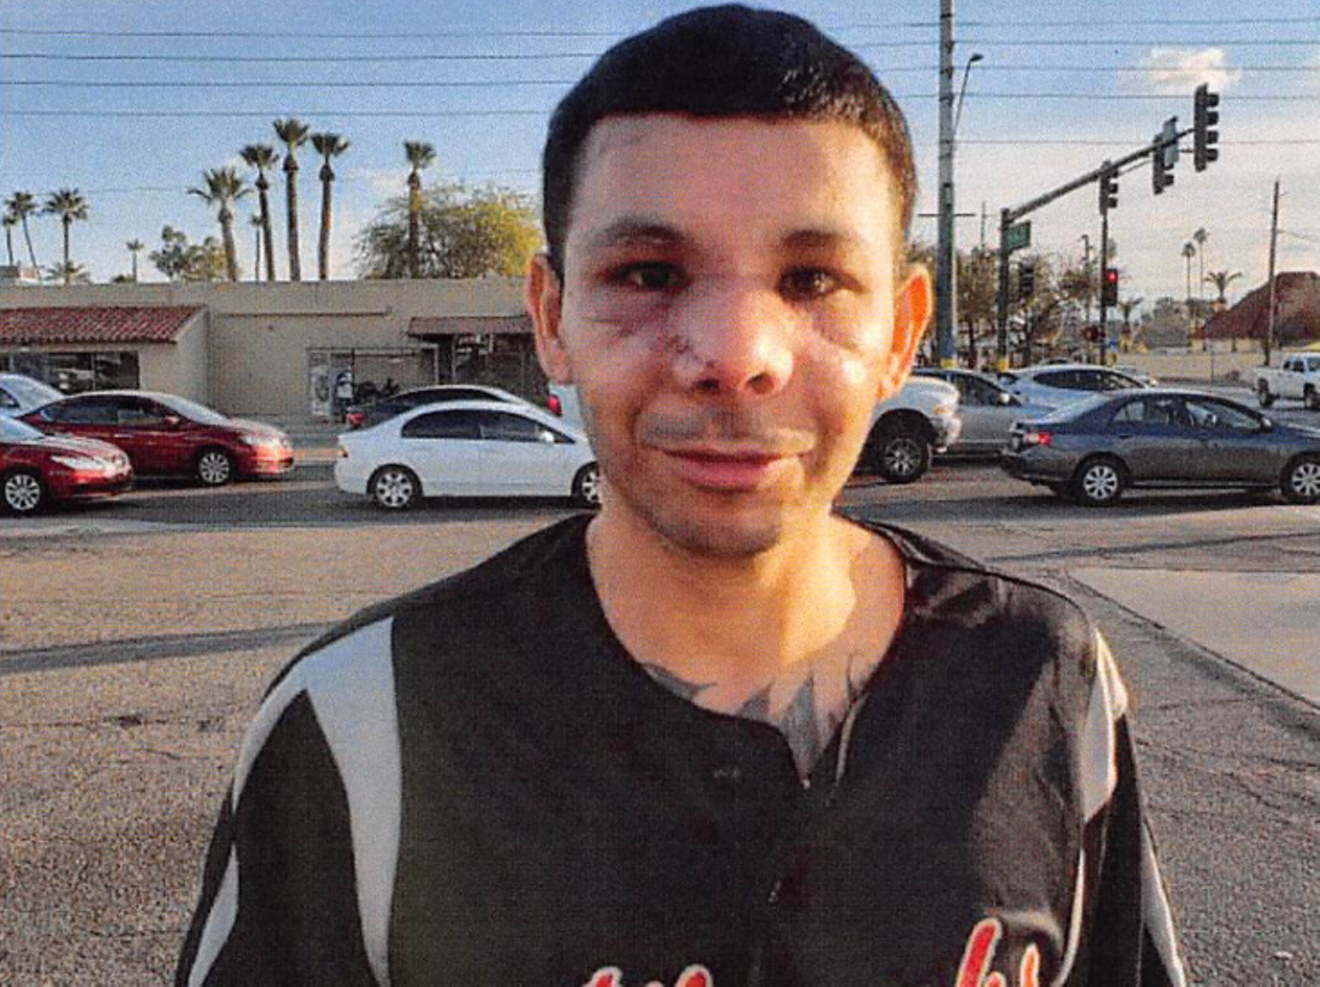 Carlos Balli was mauled by an Arizona canine officer in January.